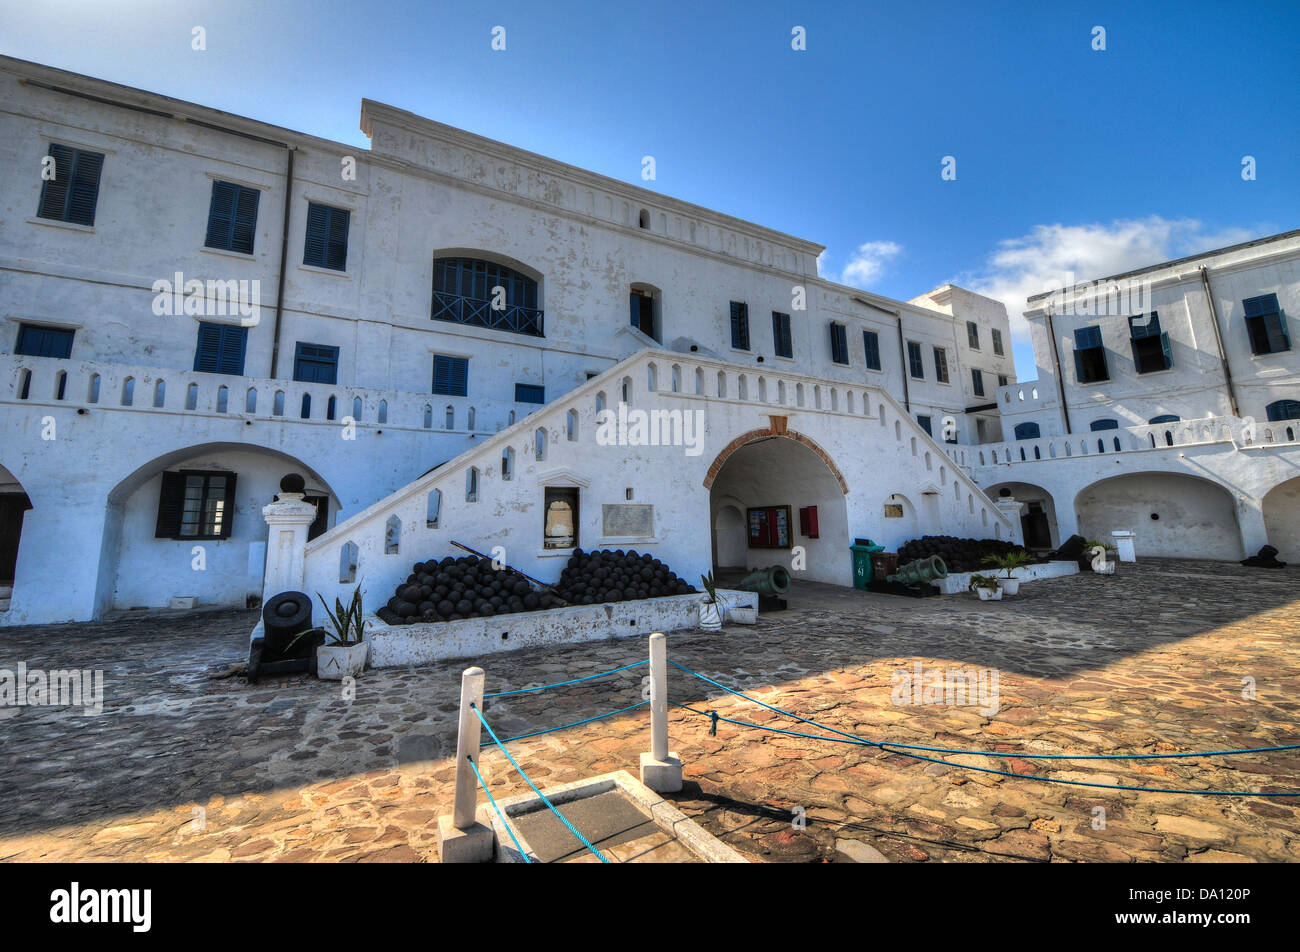 Cape Coast Castle is a fortification in Ghana built by Swedish traders for trade in timber and gold. Stock Photo